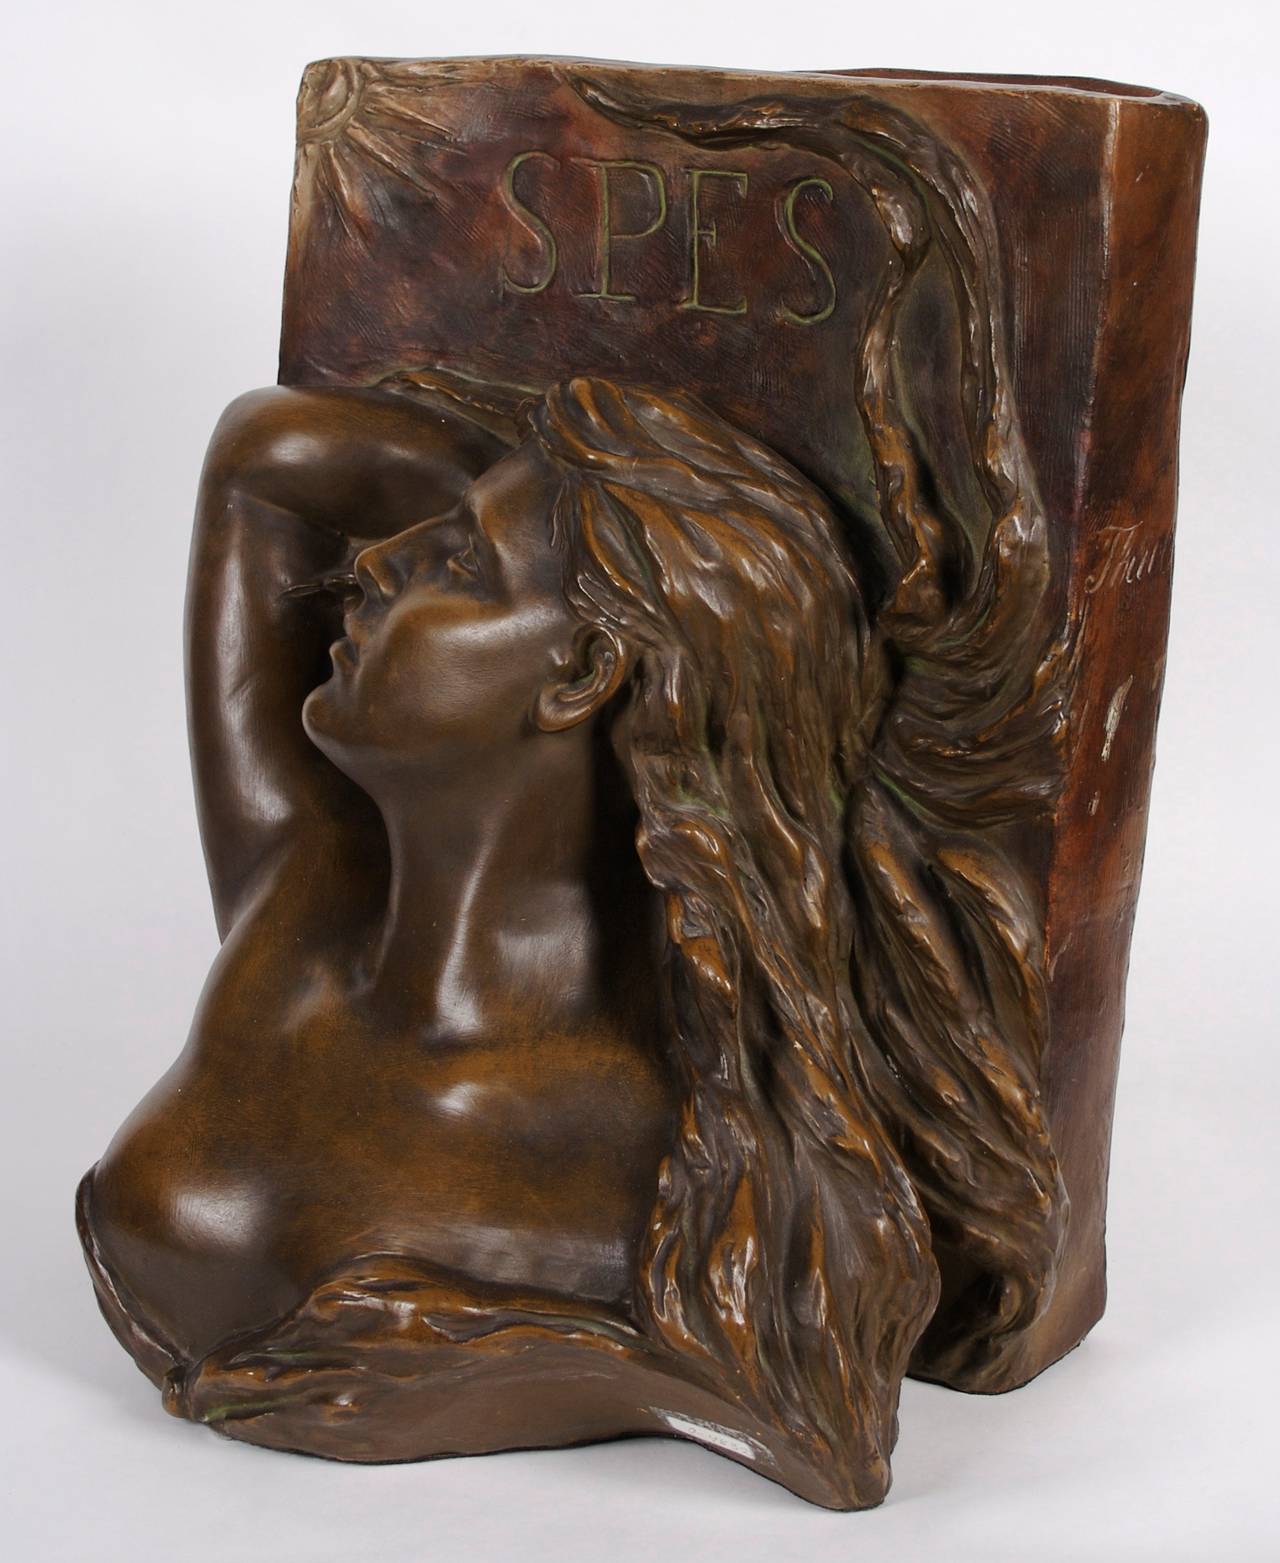 Austrian Art Nouveau period ceramic sculpture manufactured by Ernst Wahliss, 1898-1900. This is depiction of "Spes," the ancient Roman goddess of Hope.